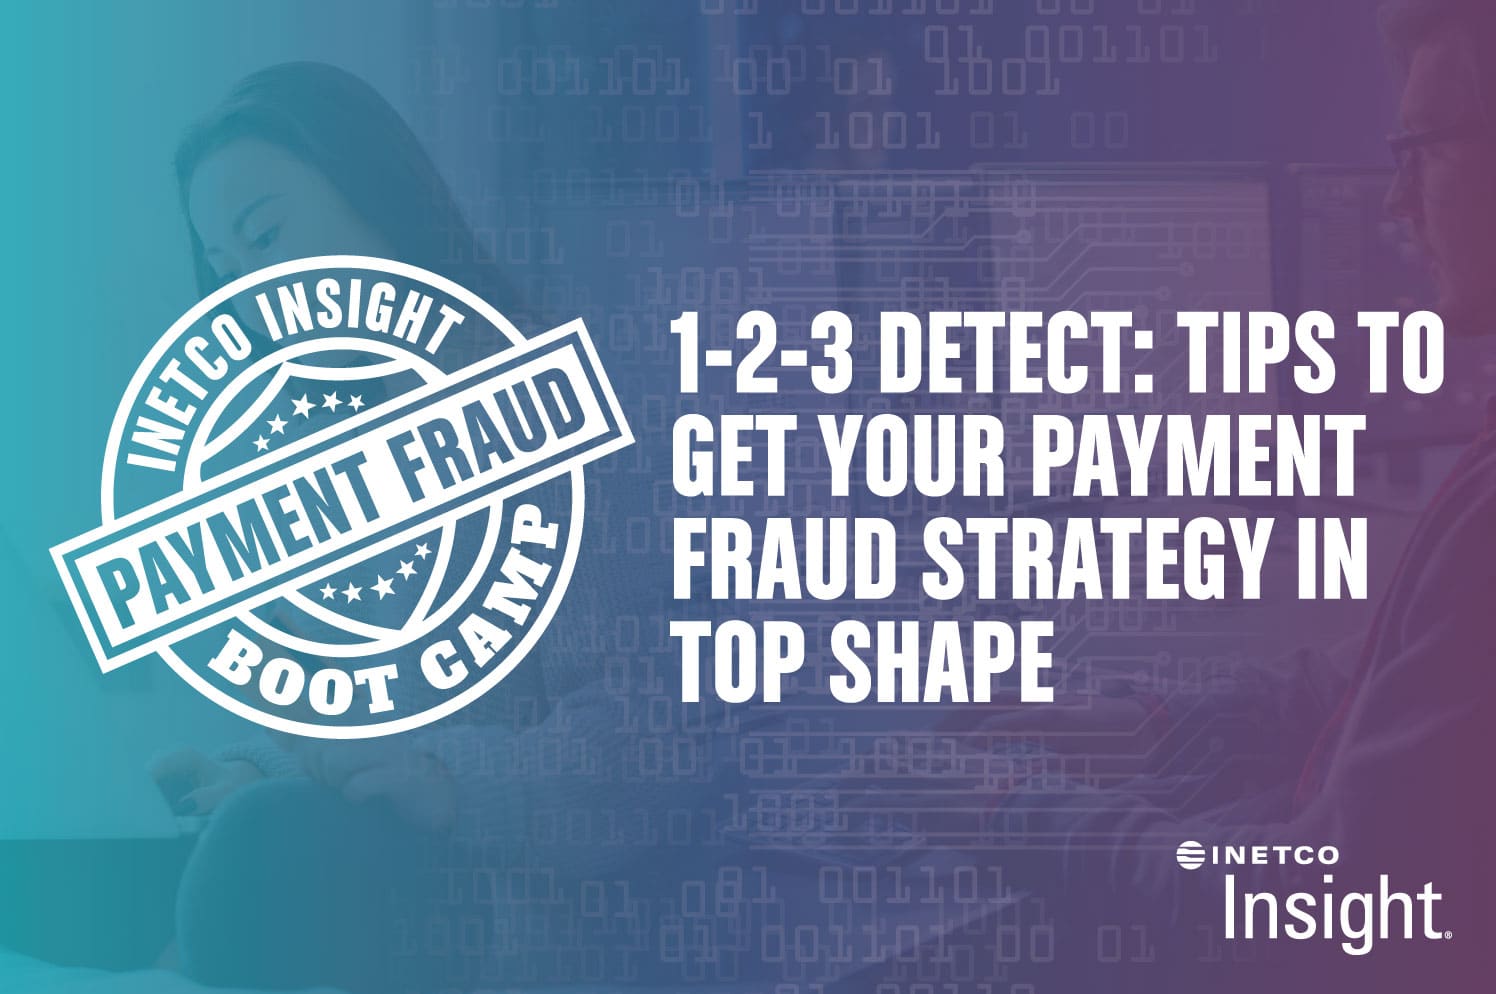 1-2-3 Detect: Tips to get your payment fraud strategy in top shape